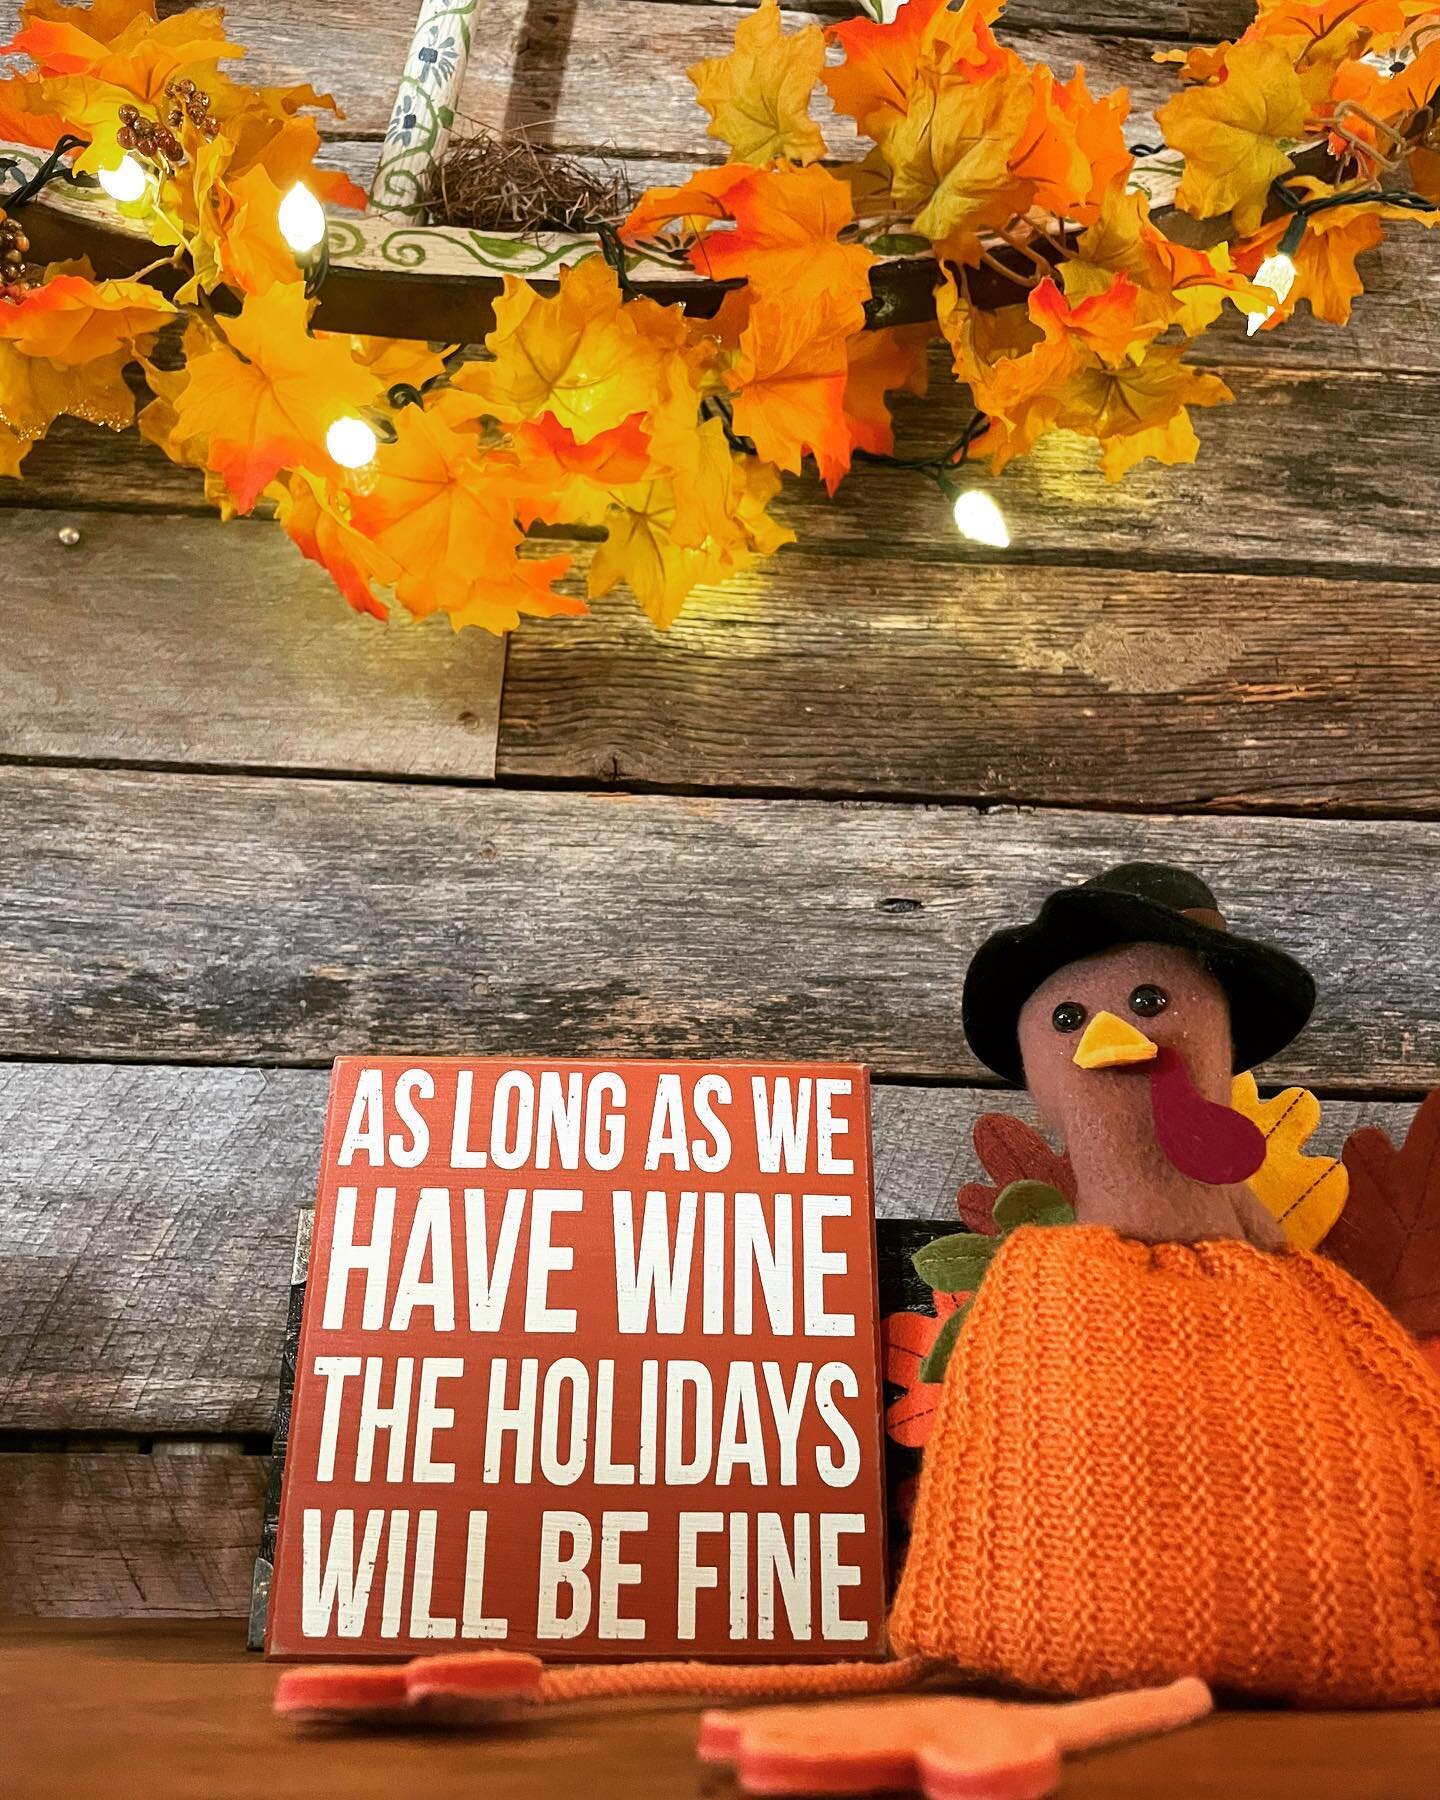 National Cliche Day
🍂
Name a cliche. We&rsquo;ll go first: &ldquo;As long as we have wine the holidays will be fine&rdquo;
🍂
Cliches became cliches because they&rsquo;re true time and time again. And YES it is true for every holiday that wine will 